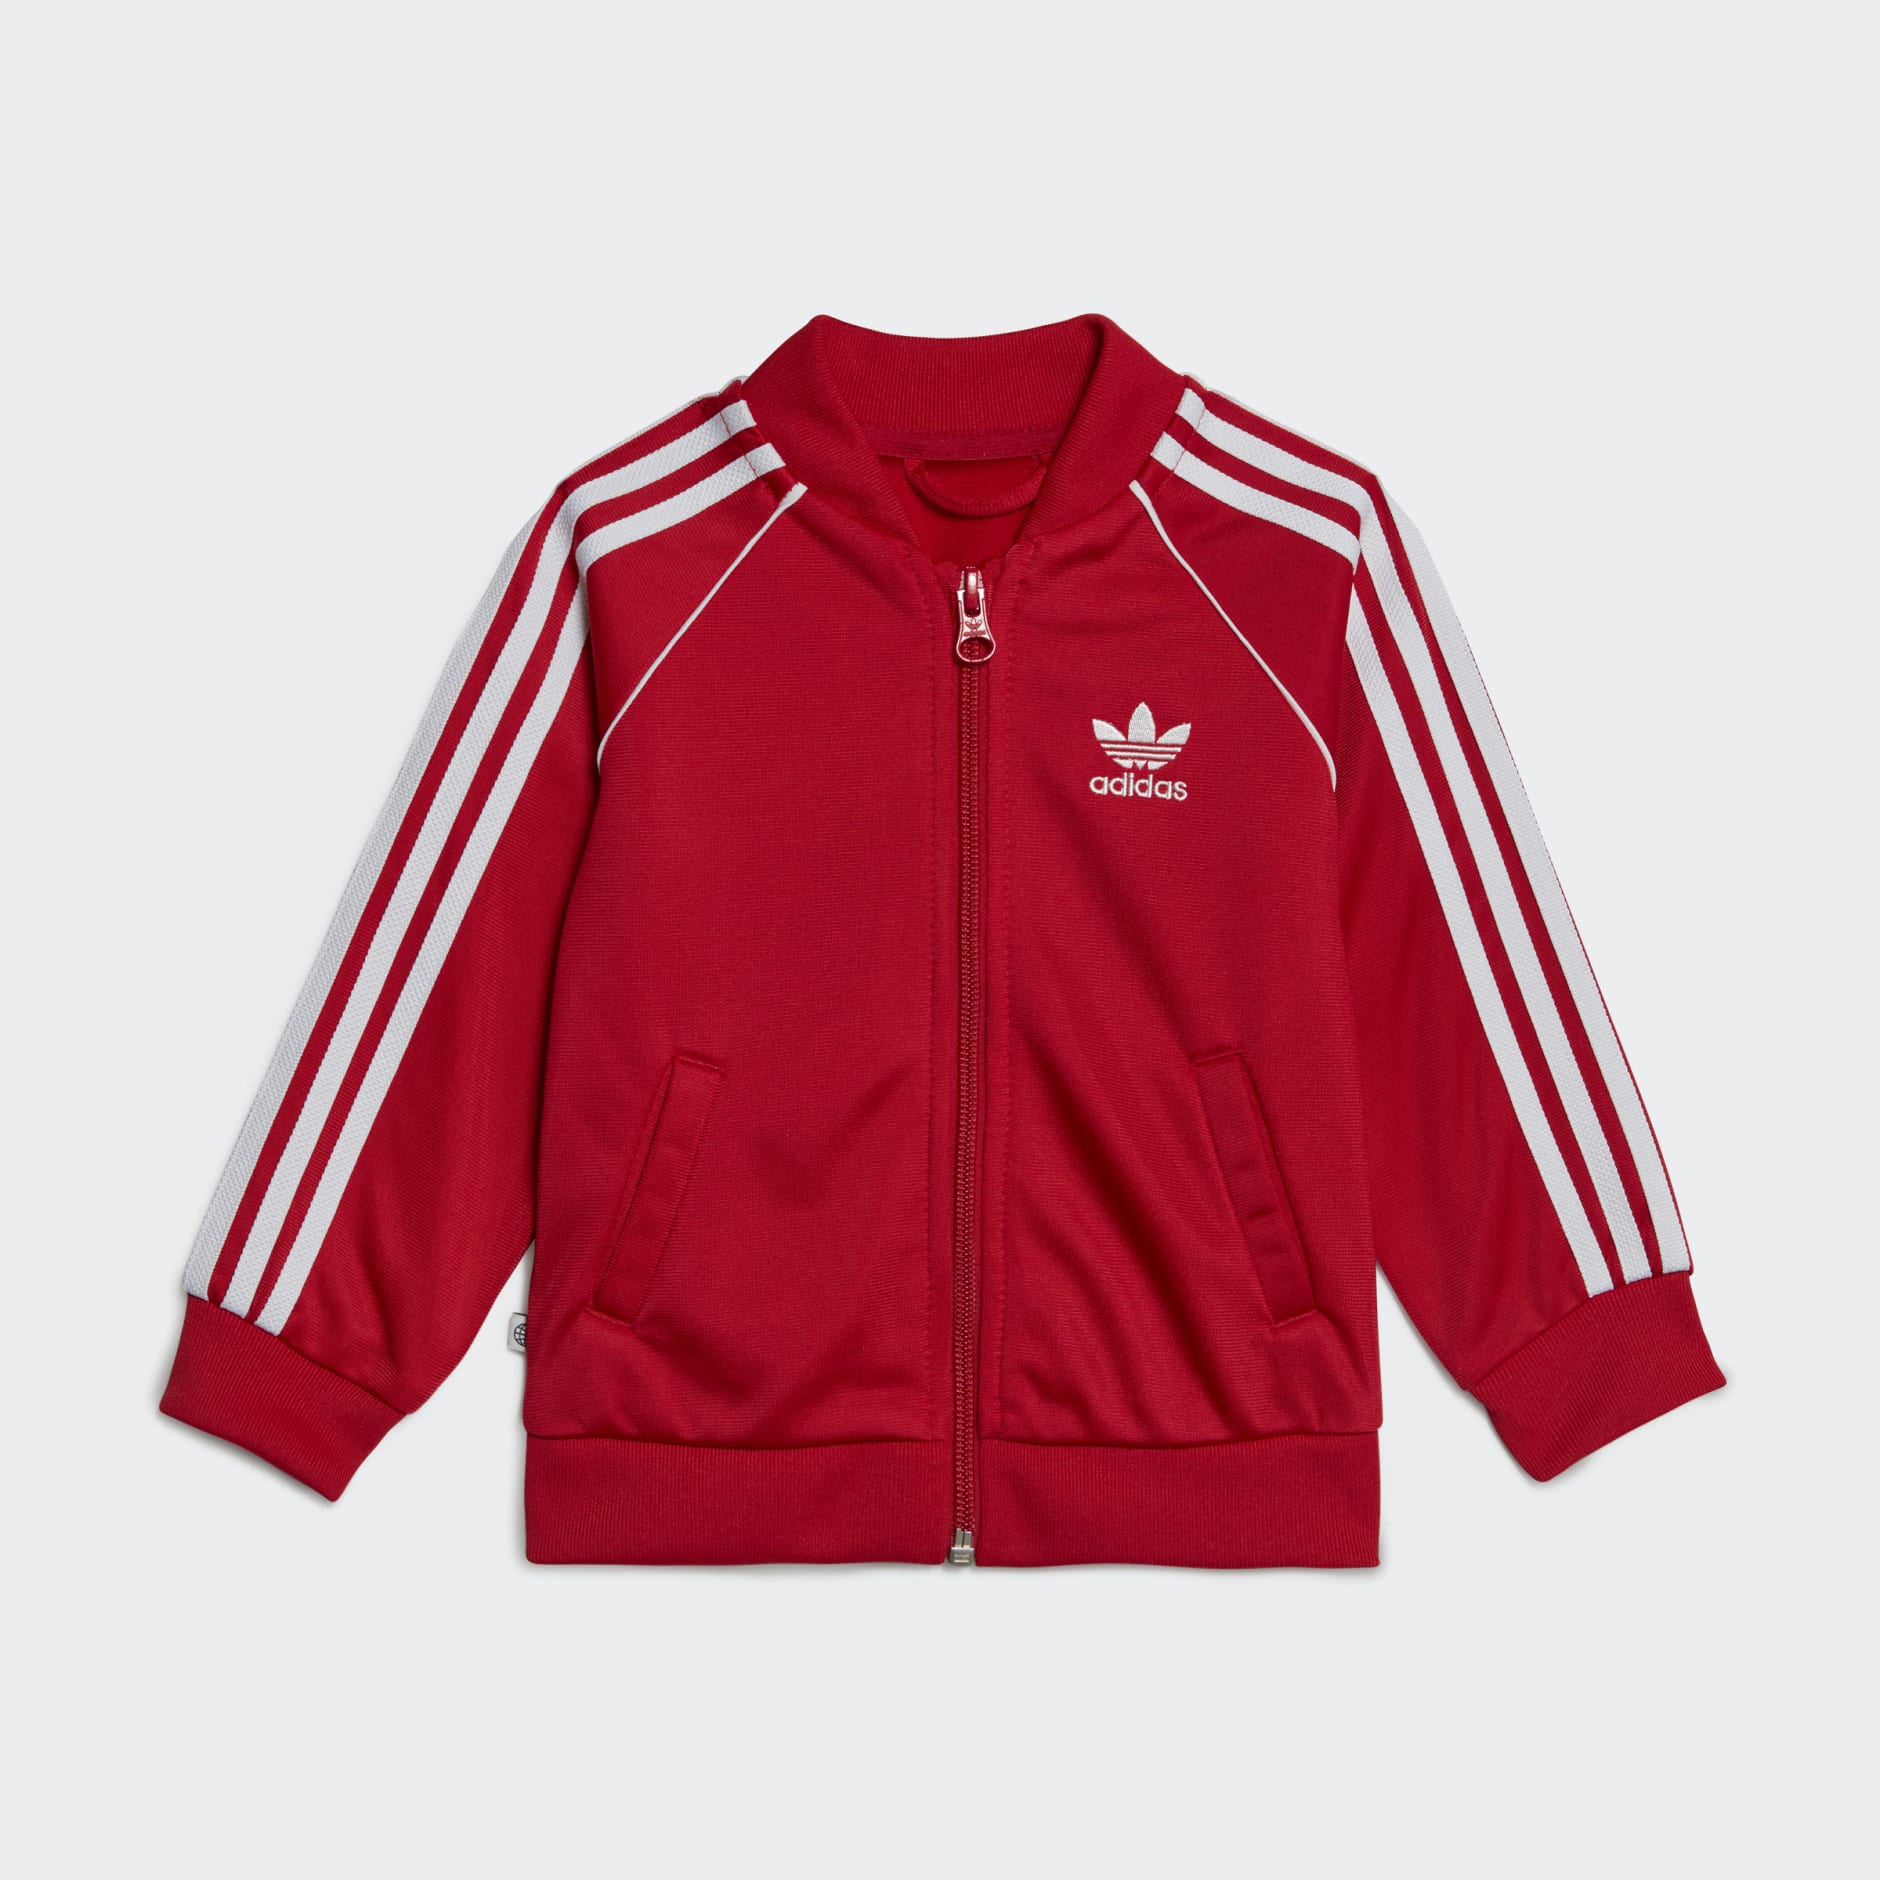 Kids Clothing - Adicolor SST Track Suit - Red | adidas Egypt